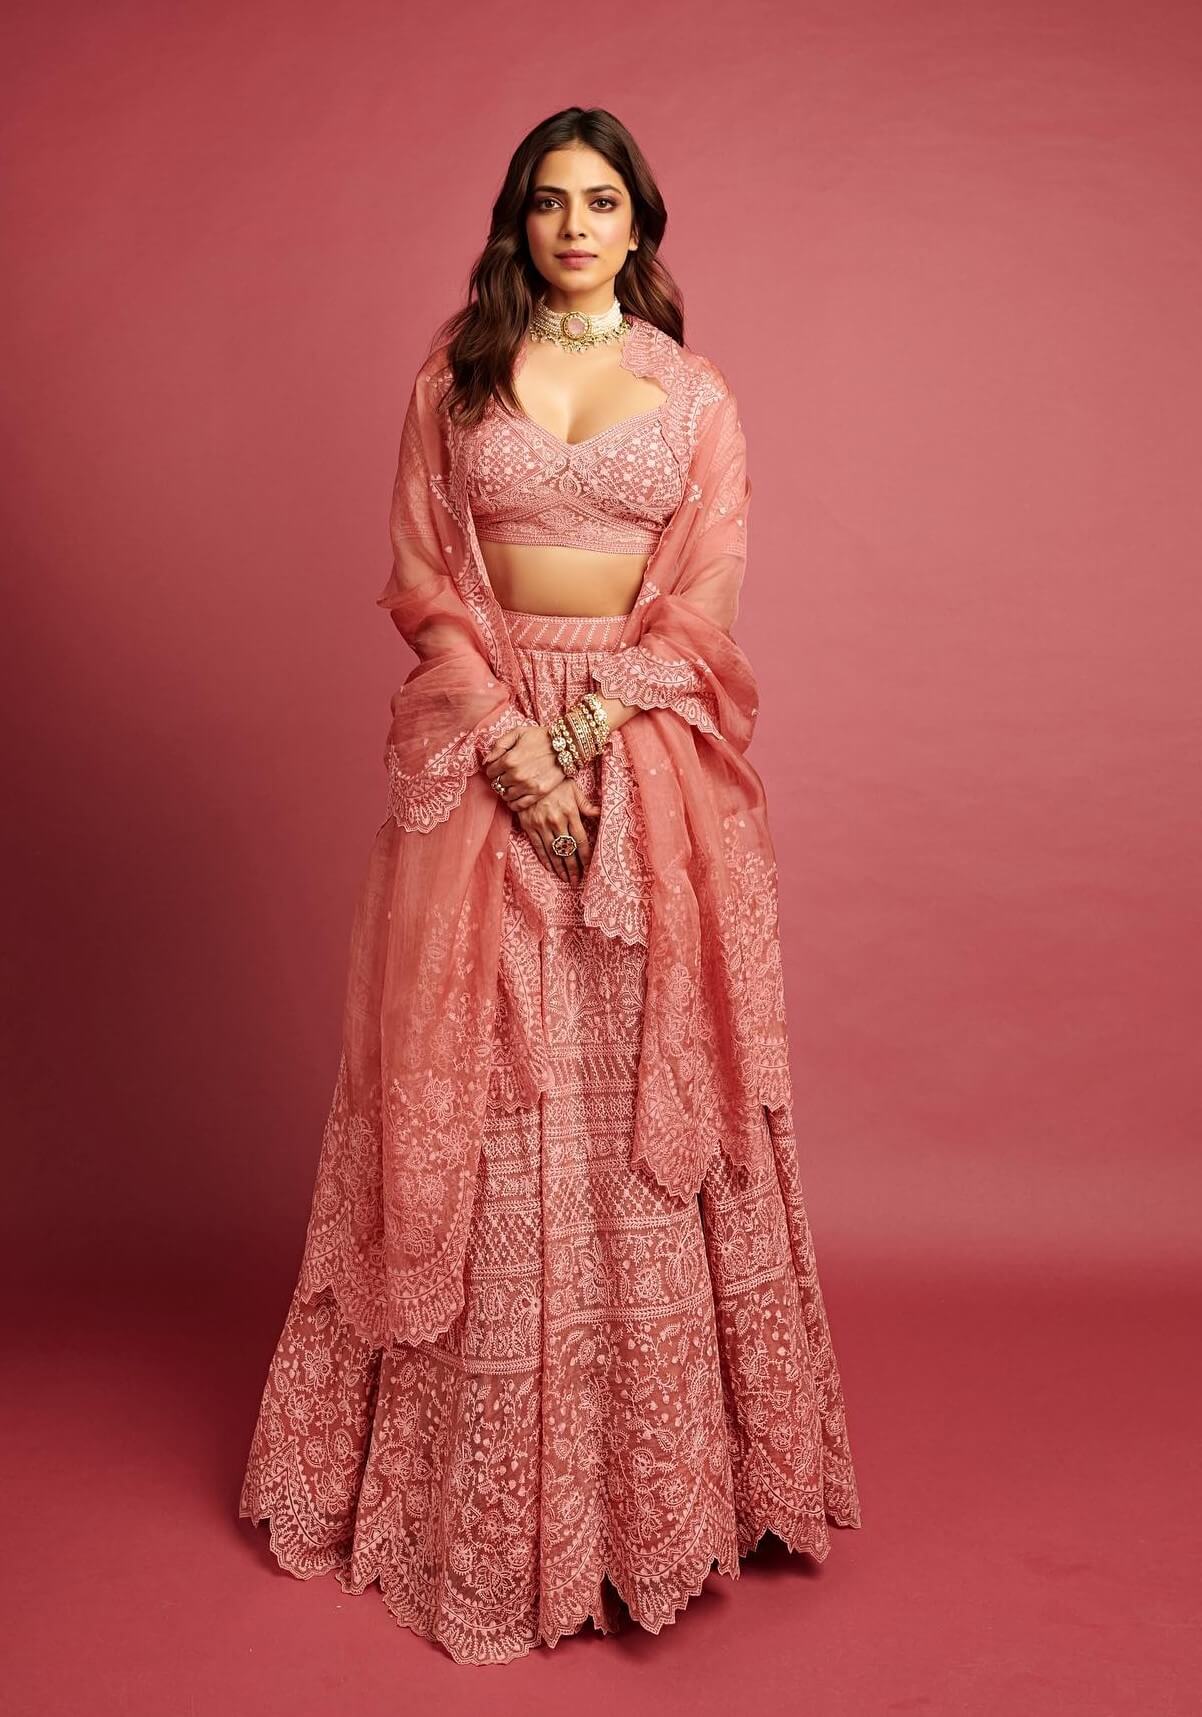 Malavika Mohanan Mesmerizing Look In Pink Embroidered Lehenga - Traditional & Tempting Outfits & Looks